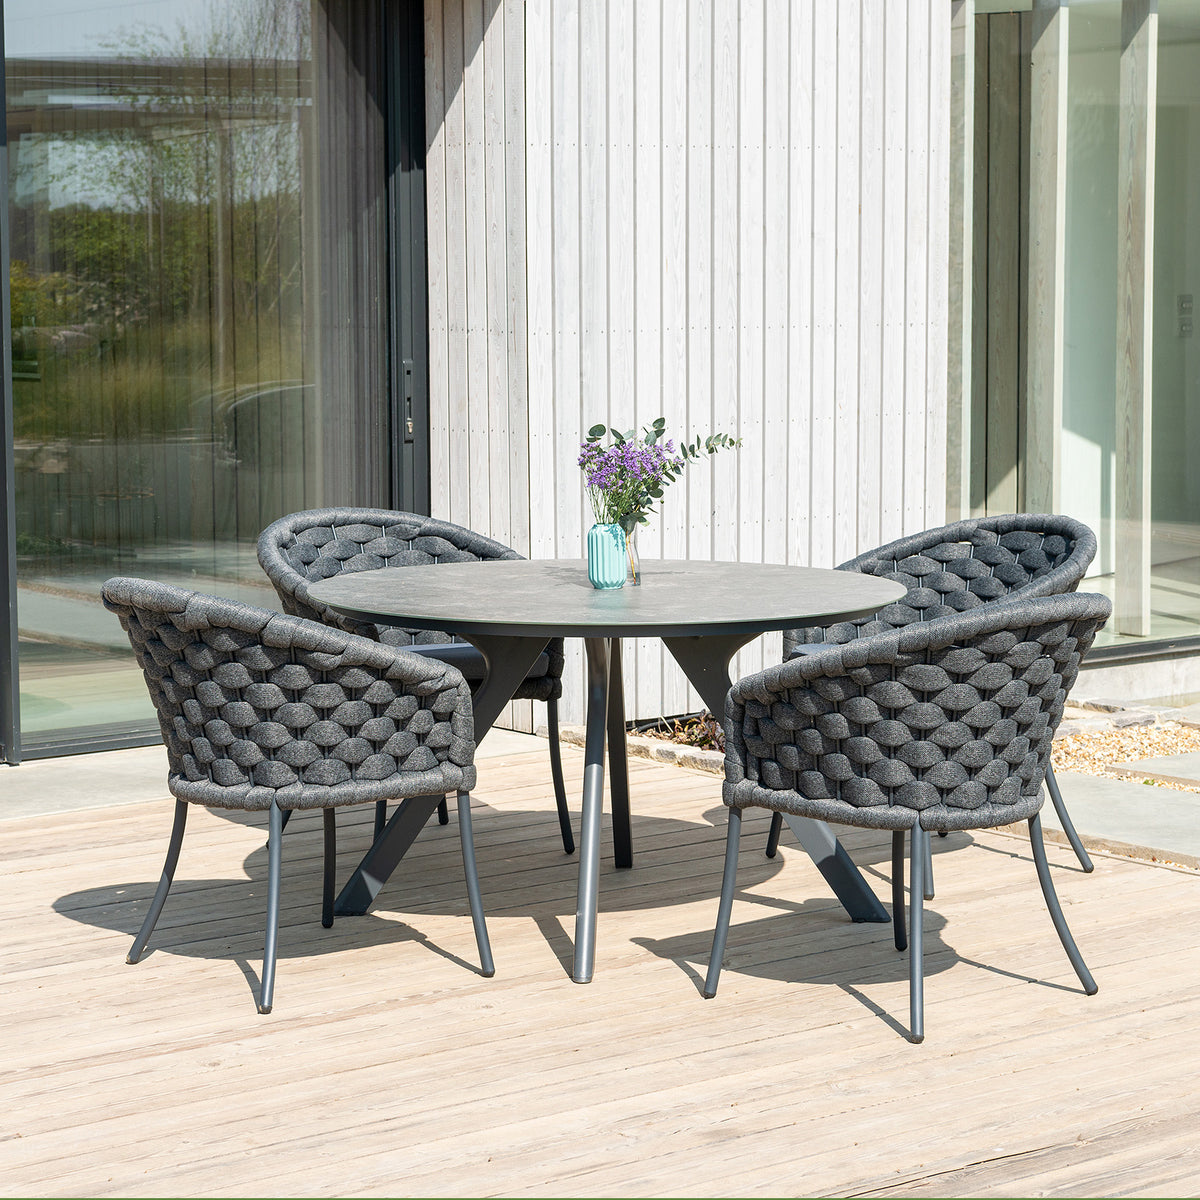 Alexander Rose Cordial Luxe Outdoor Dining Chair with Cushion - Dark Grey